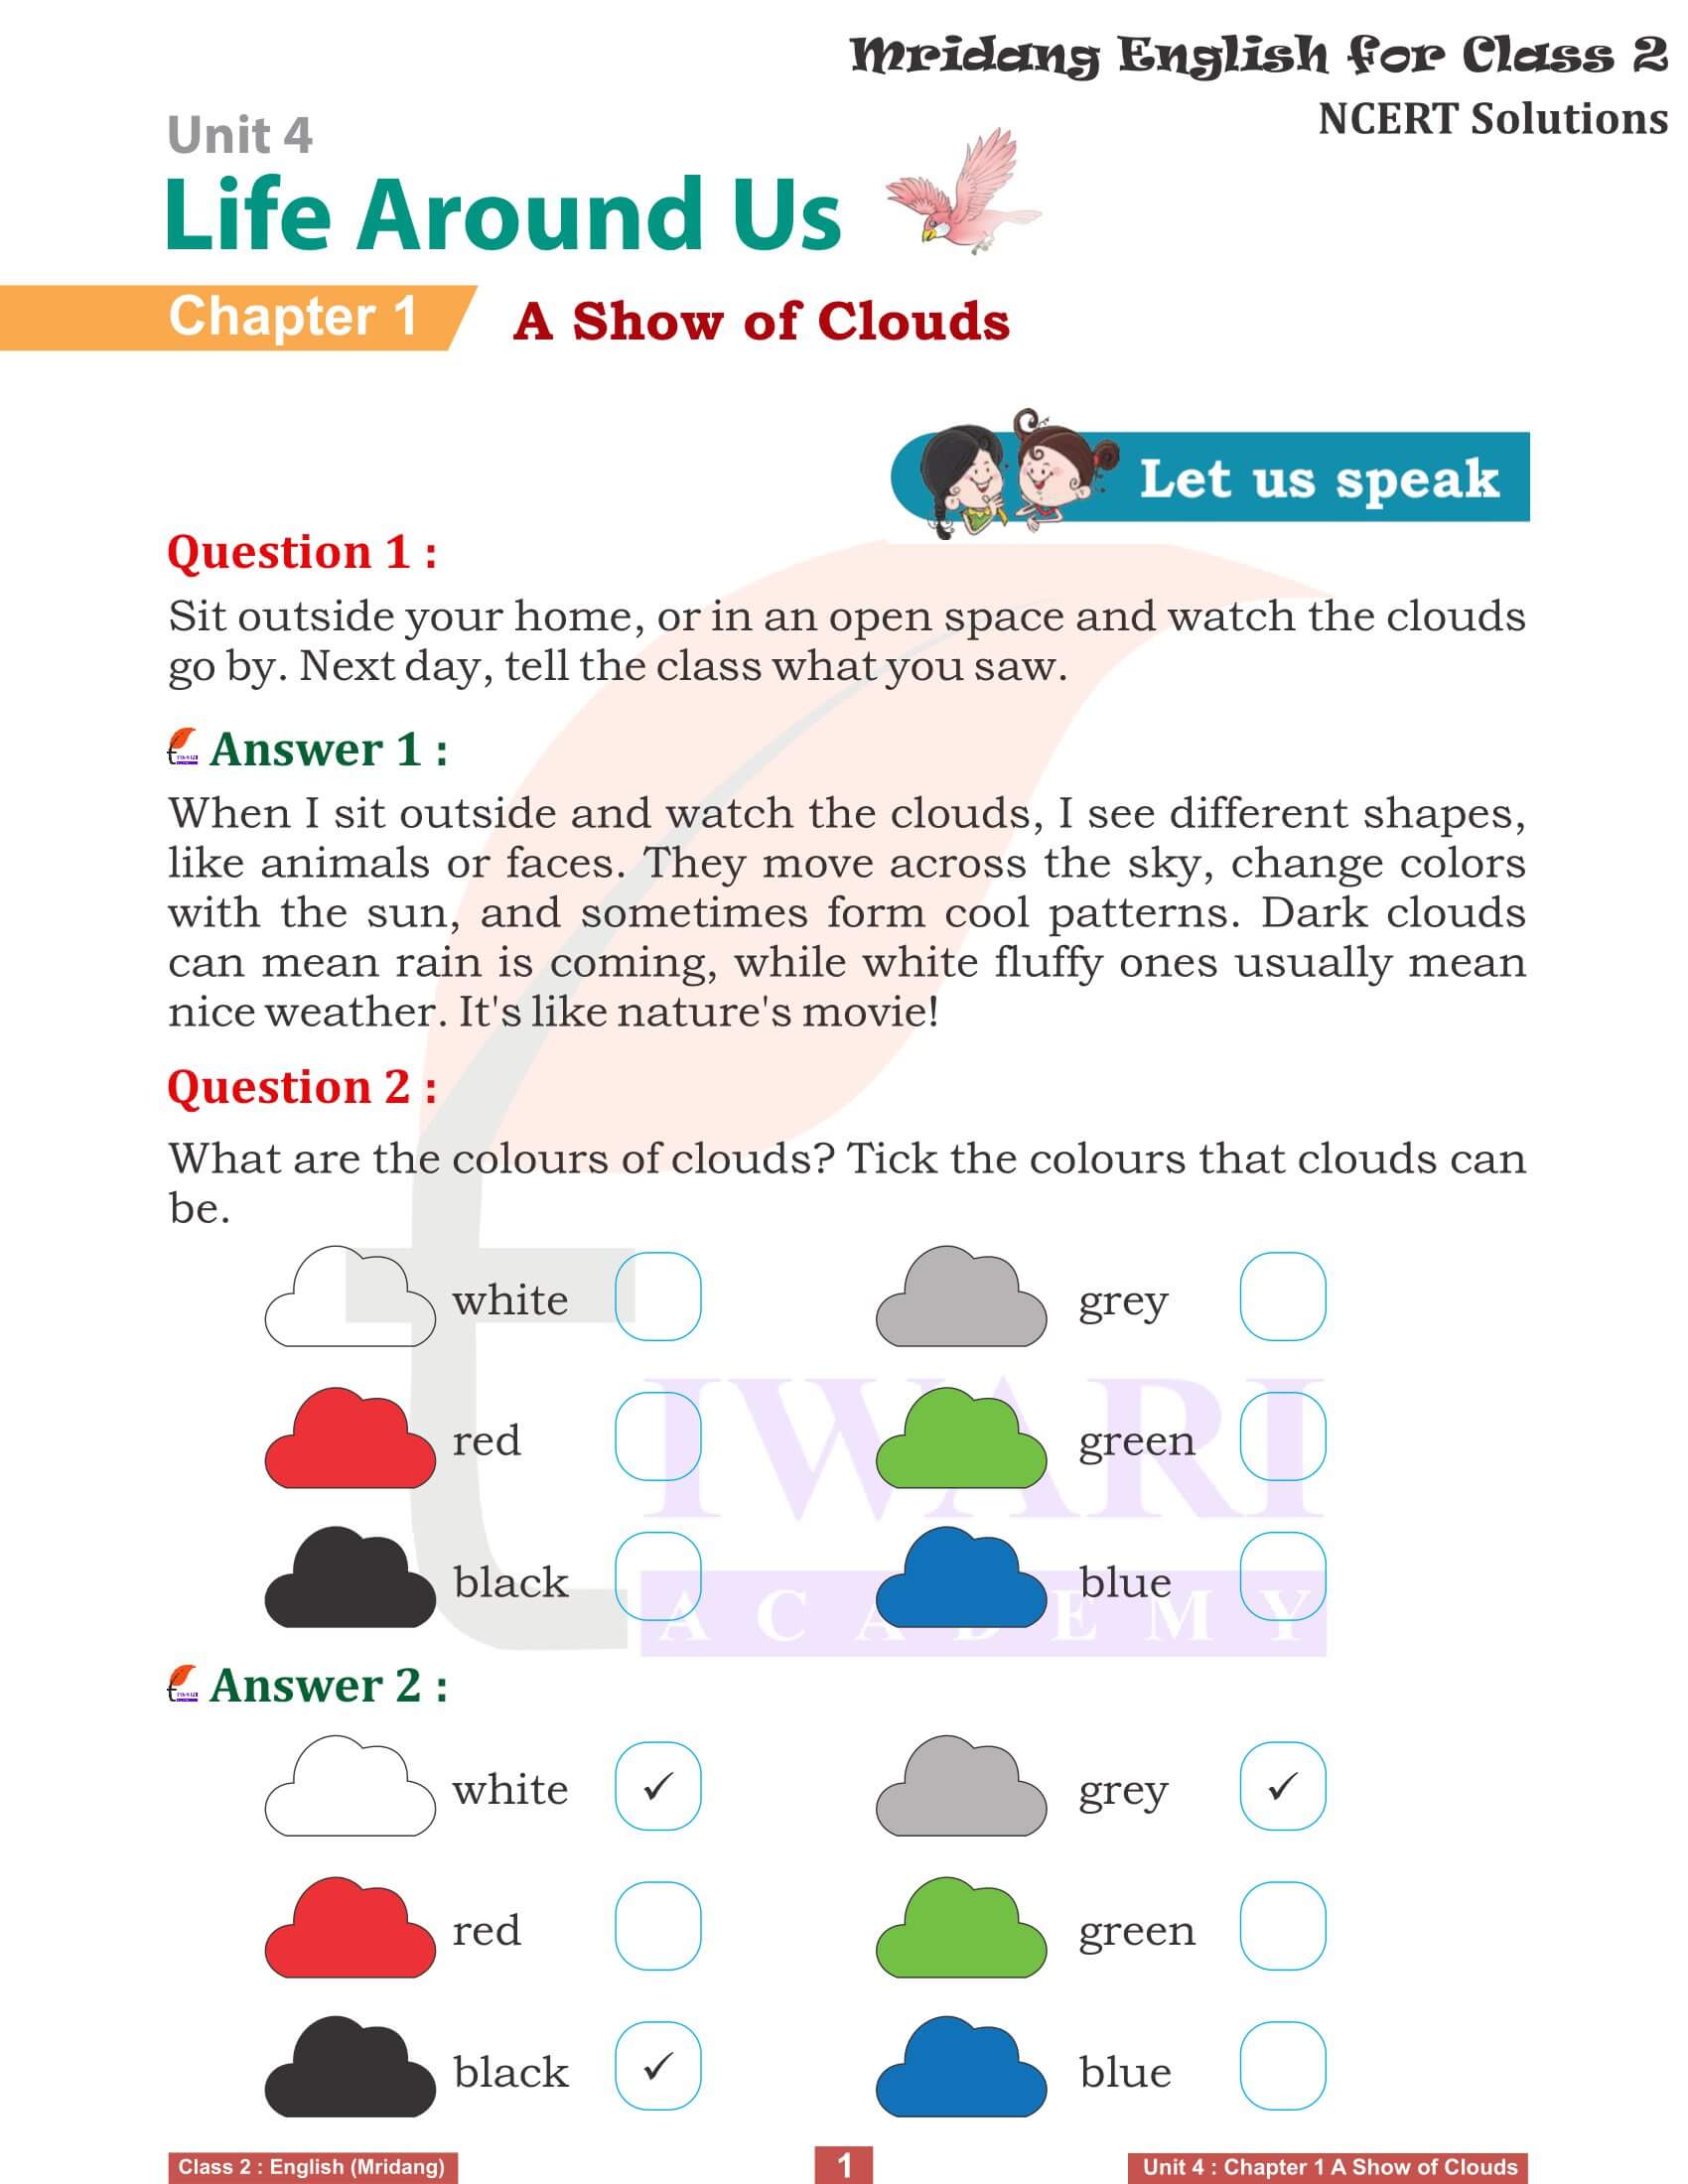 NCERT Solutions for Class 2 English Mridang Unit 4 Life Around Us Chapter 1 A Show of Clouds